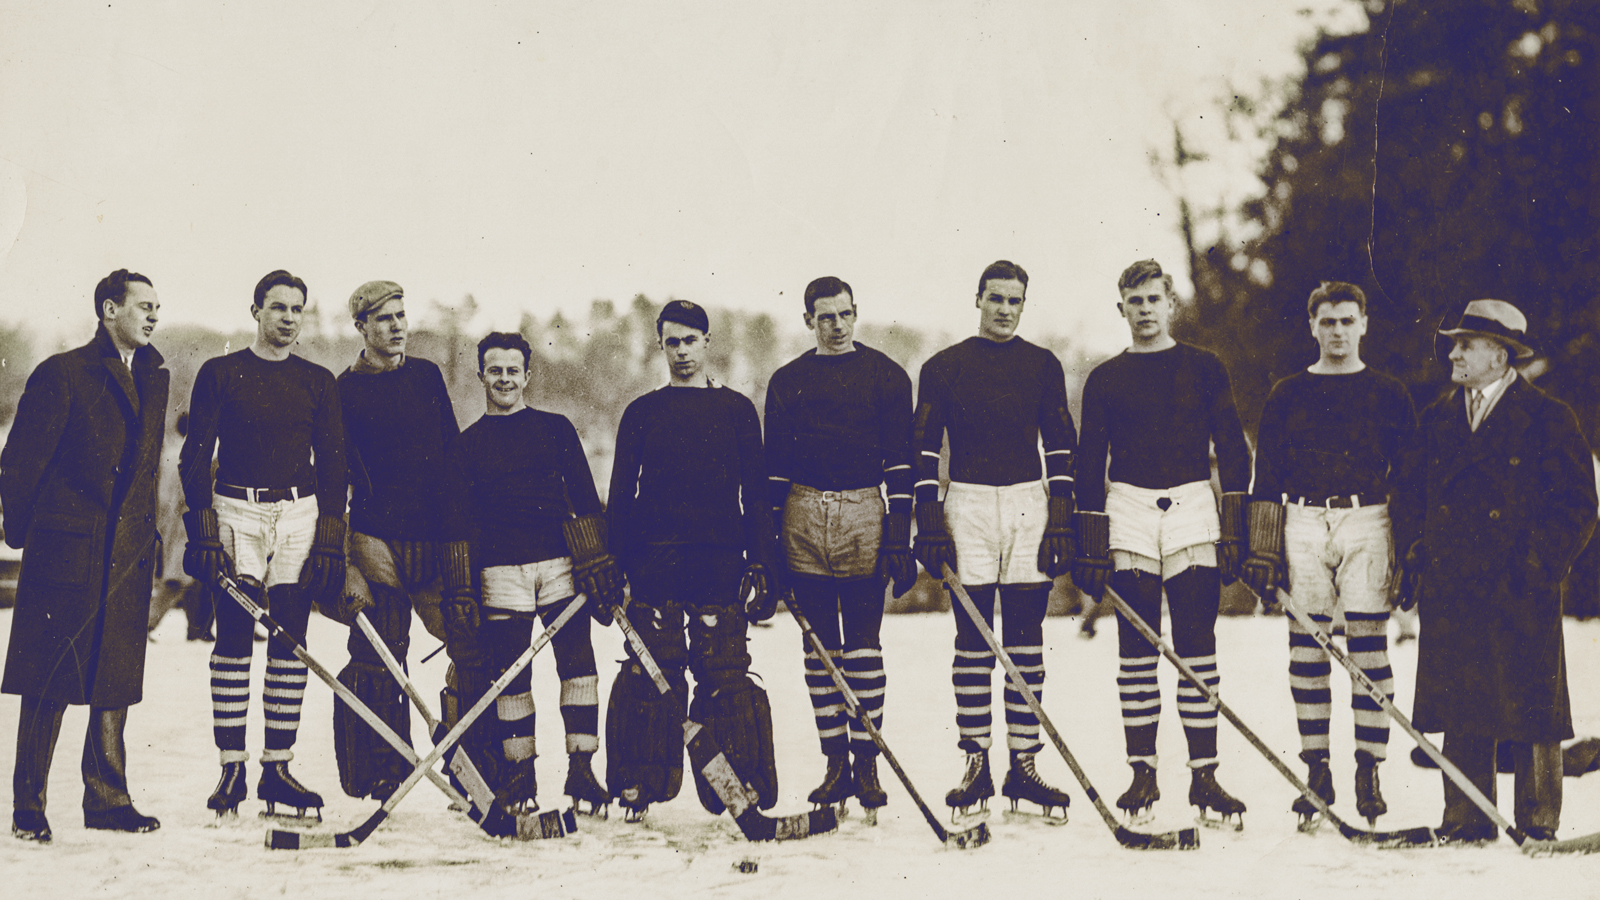 The Big Red men's hockey team during its Beebe Lake days, with head coach Nicky Bawlf pictured at right